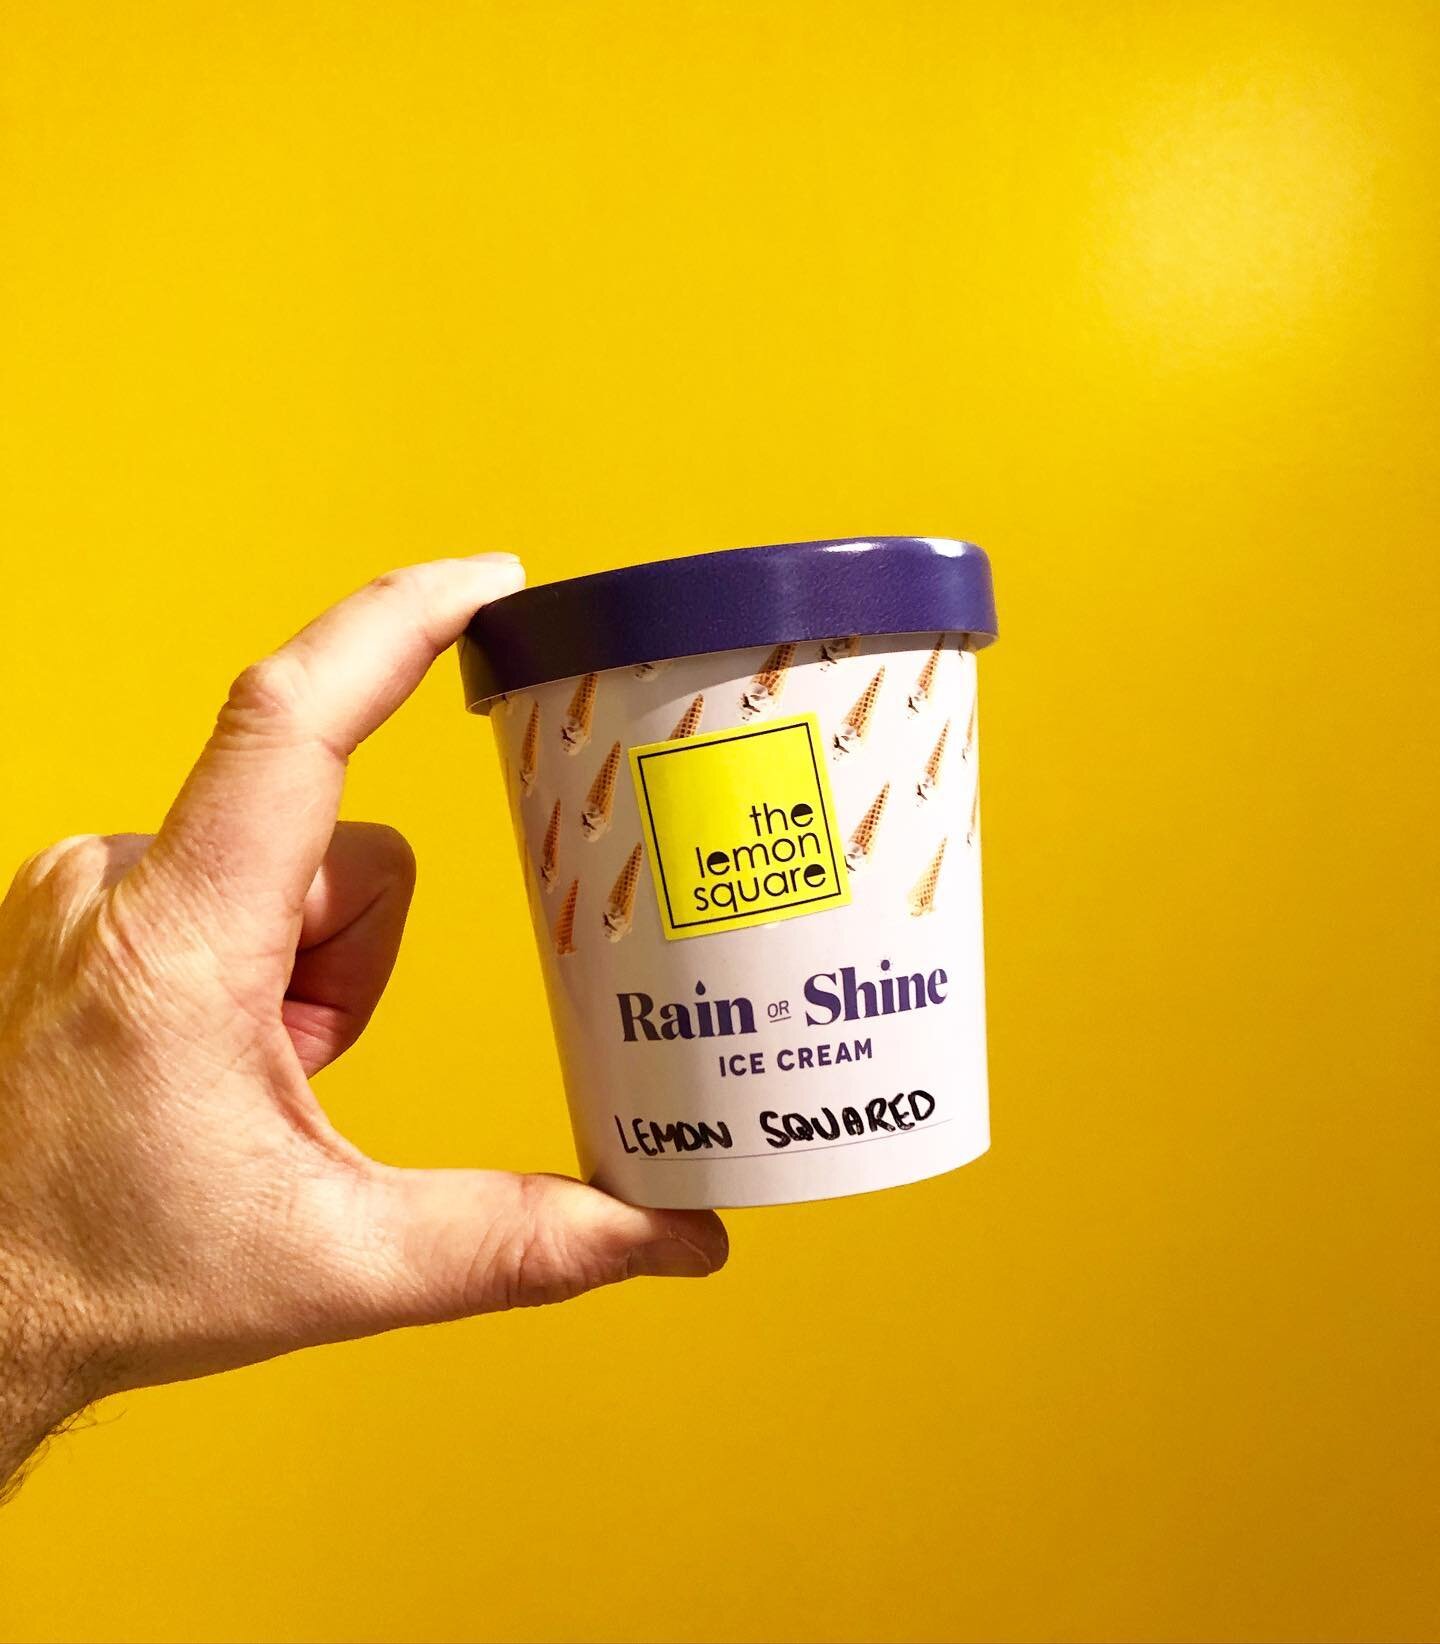 ICE CREAM IS BACK IN STOCK 🍋🍋🍋 at our #Gastown shop.